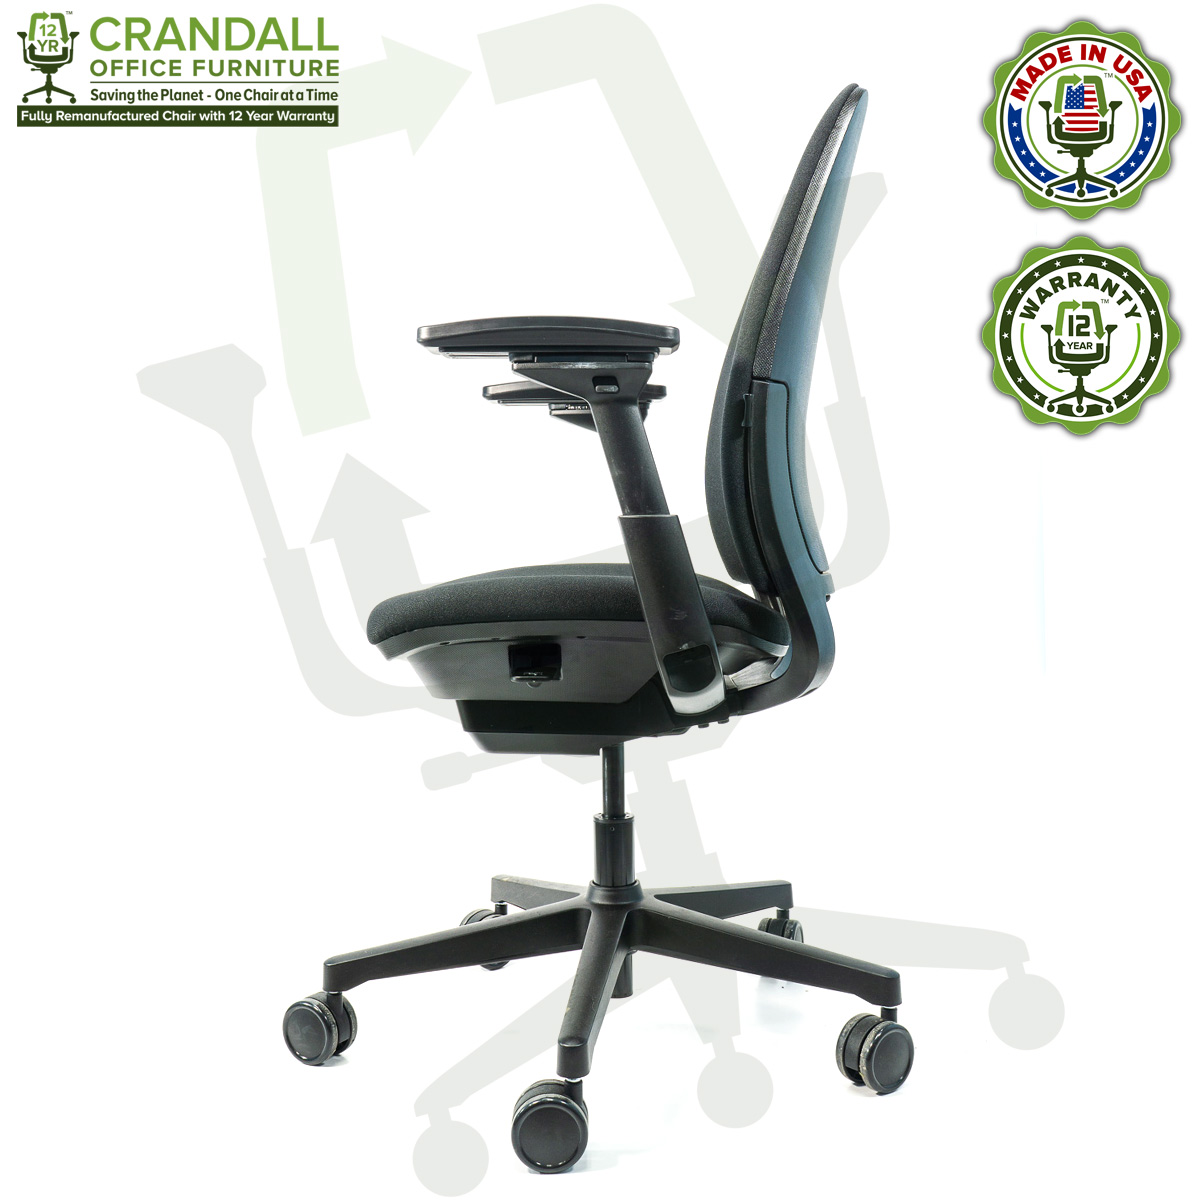 Crandall Office Furniture Remanufactured Steelcase Amia Chair with 12 Year Warranty - 03